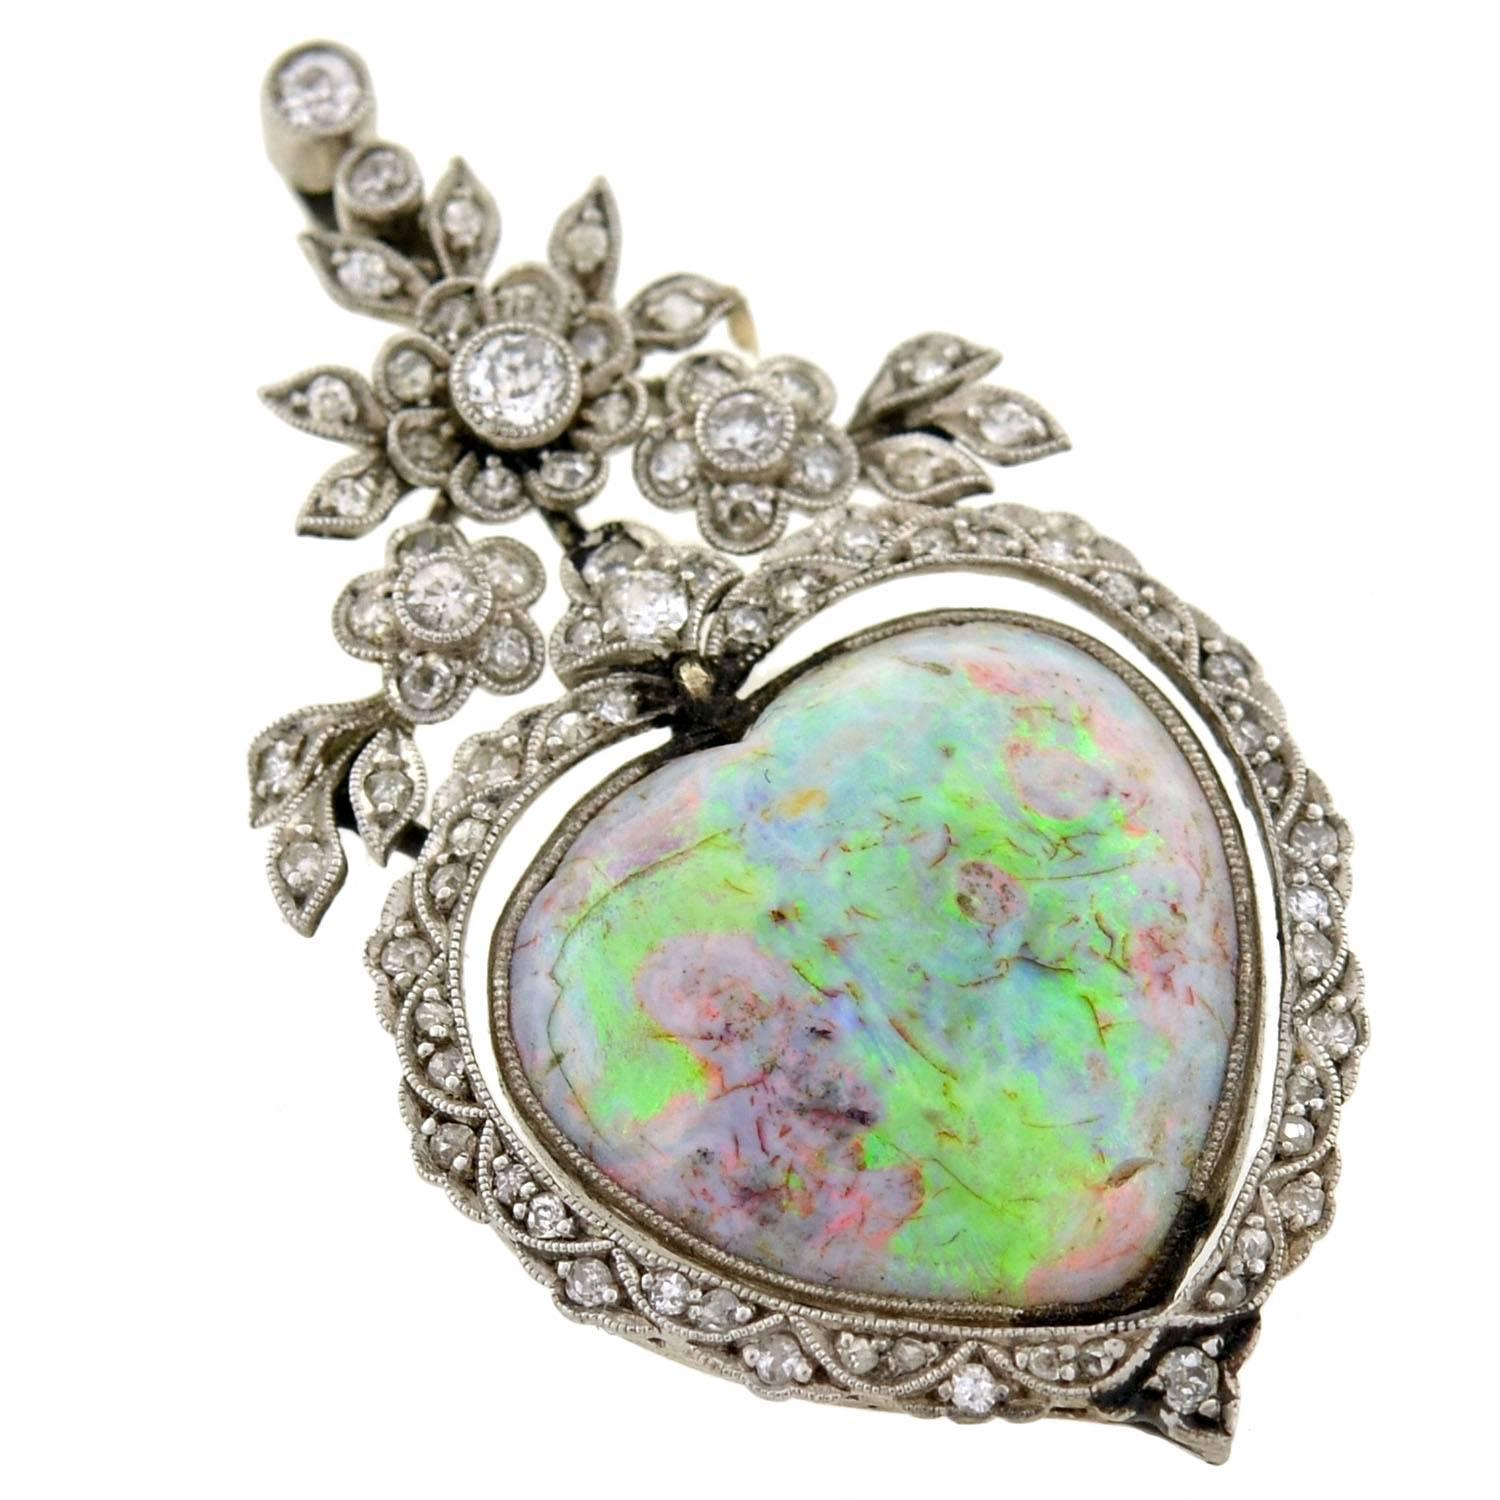 A stunning opal pendant from the Edwardian (1910) era! This delicate piece depicts a large, heart shaped opal which is surrounded by sparkling diamonds. The opal, which is vibrant in color with hues of green, pink, purple, blue and yellow, is bezel